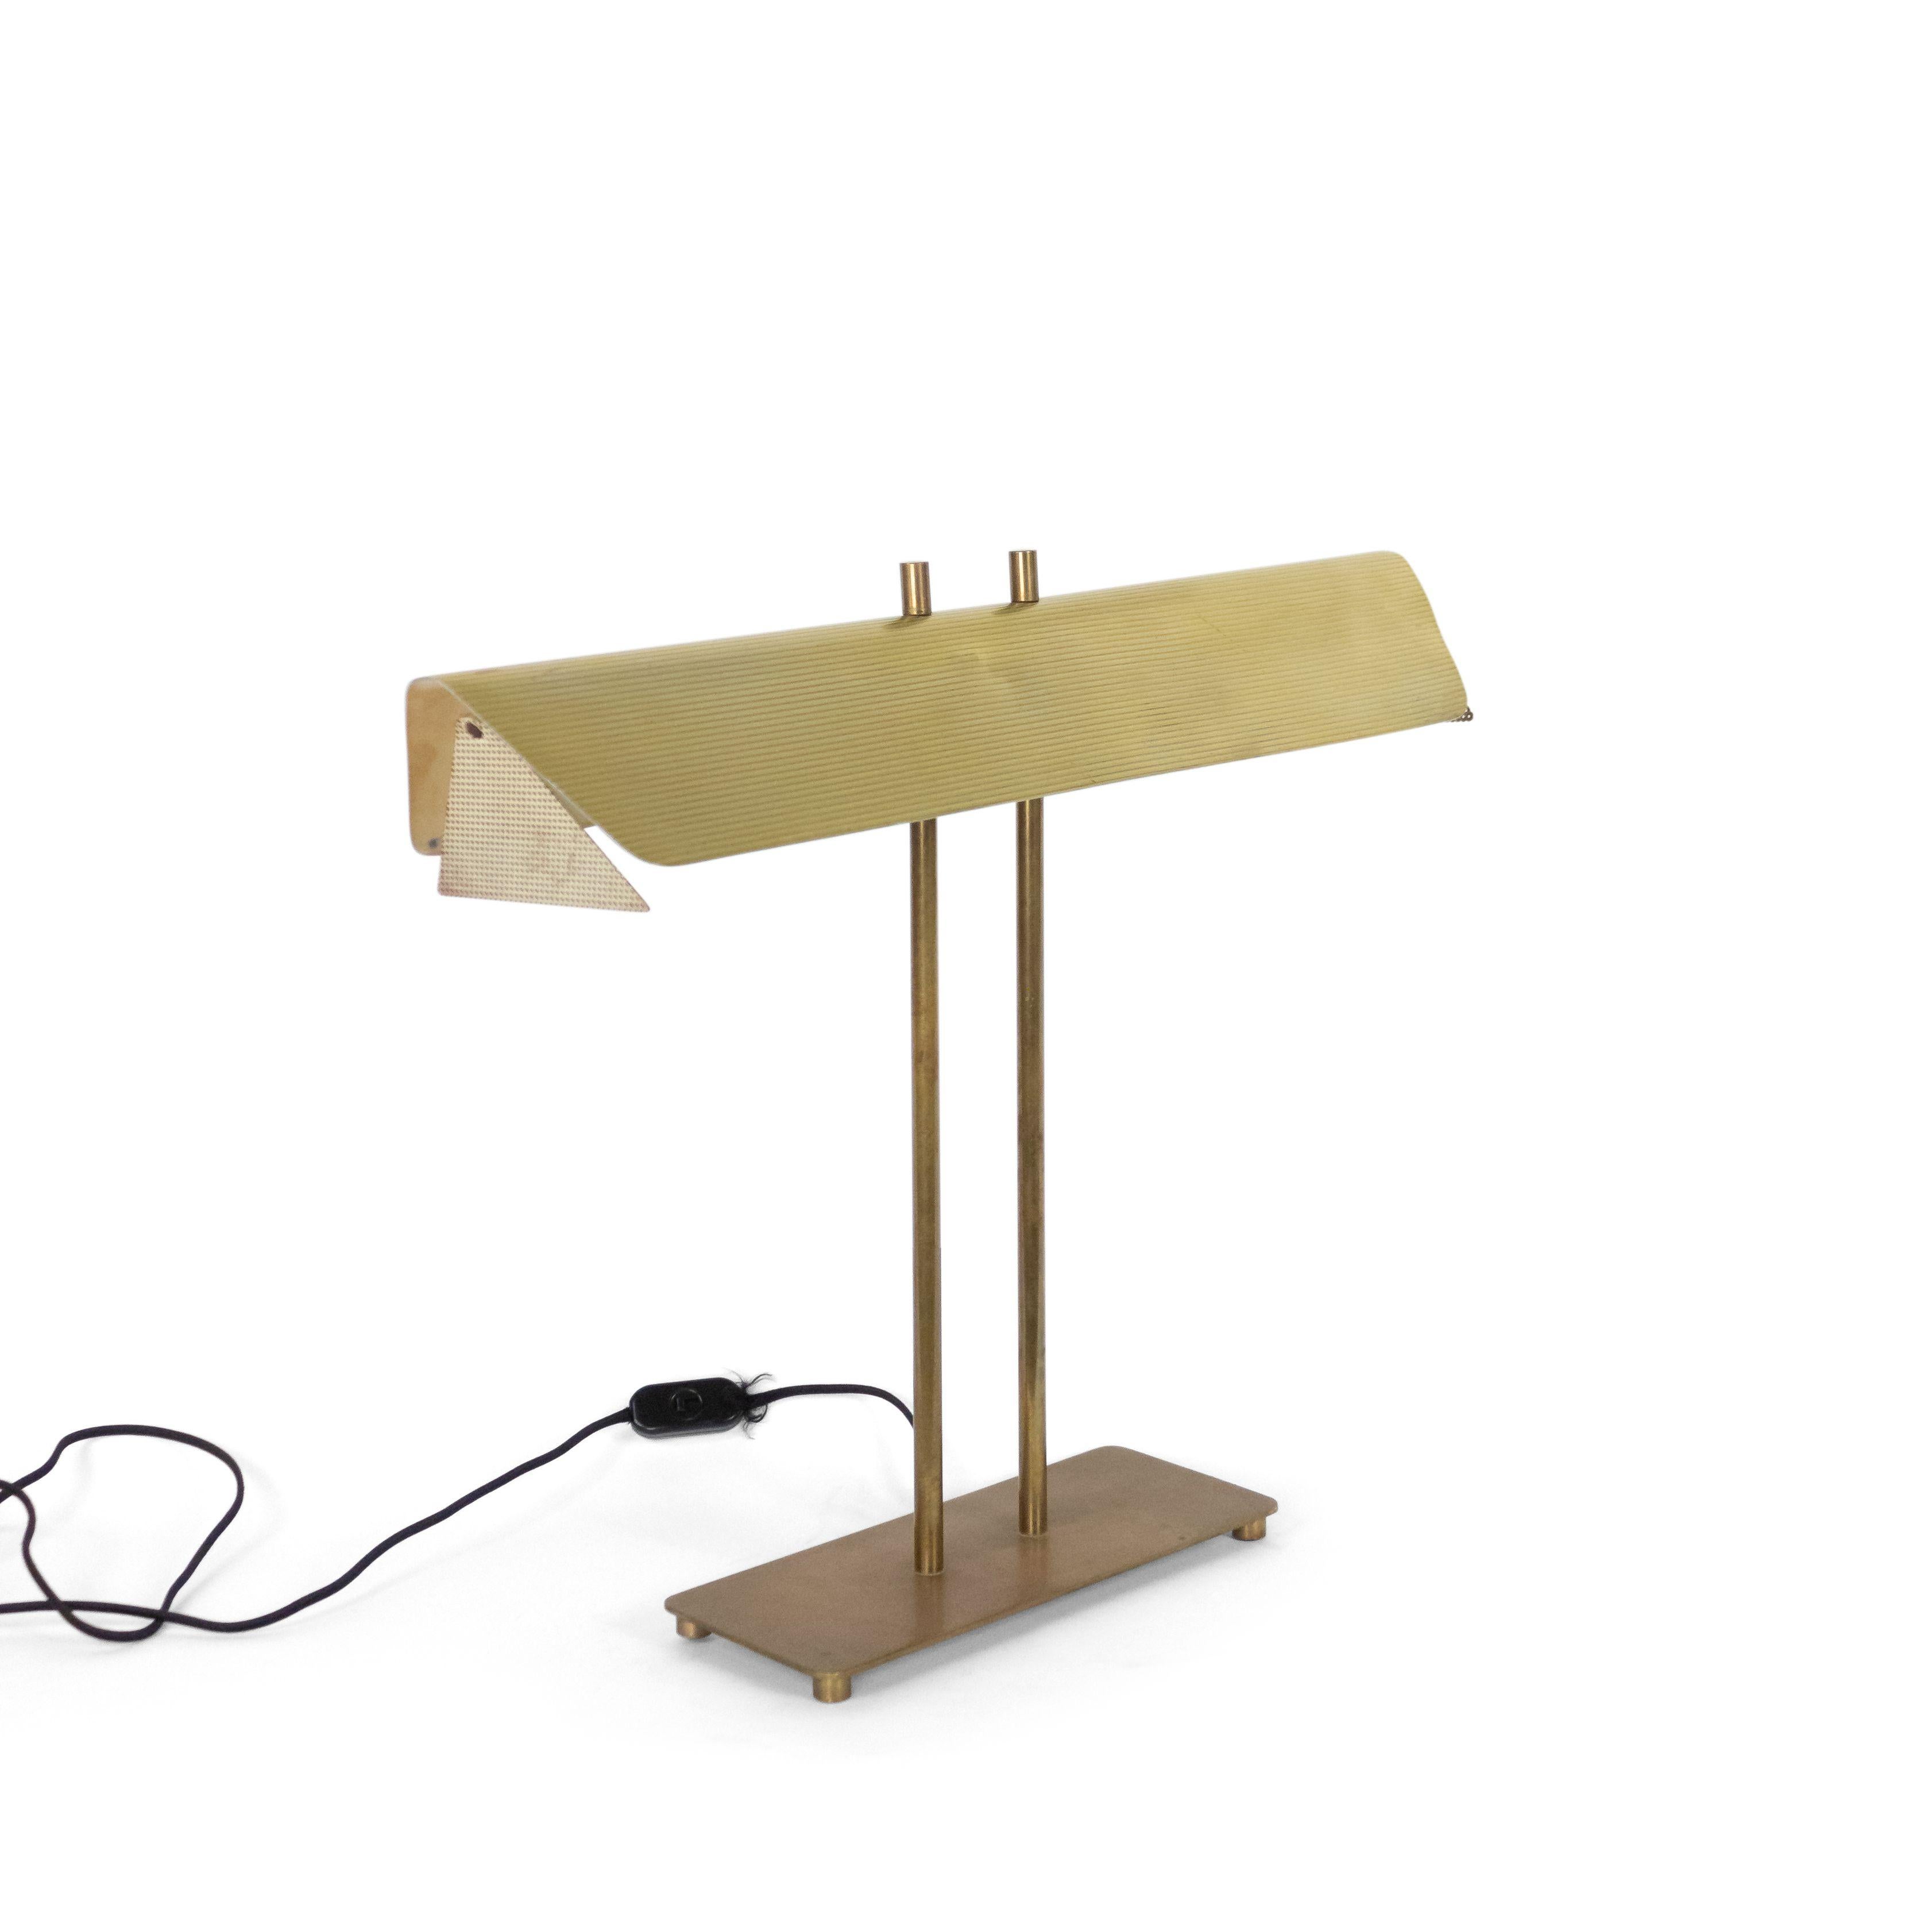 American Art Moderne 1940s brass desk lamp with white perforated sides supported by two columns on rectangular base. (attributed to Paul McCobb).